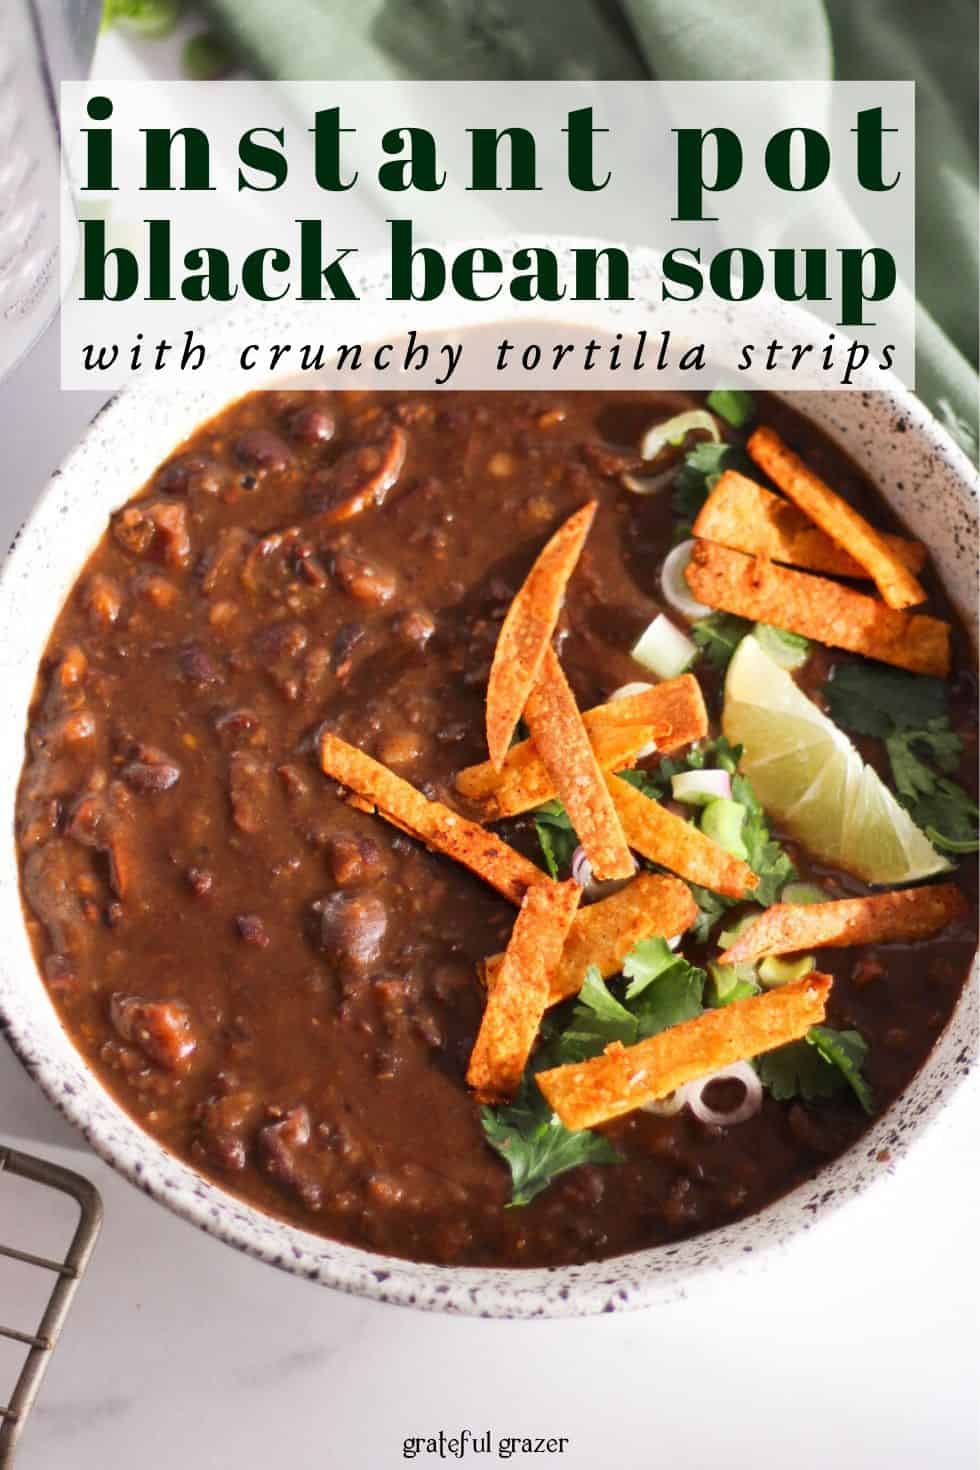 Bean soup in white bowl with text that reads, "instant pot black bean soup with crispy tortilla strips."